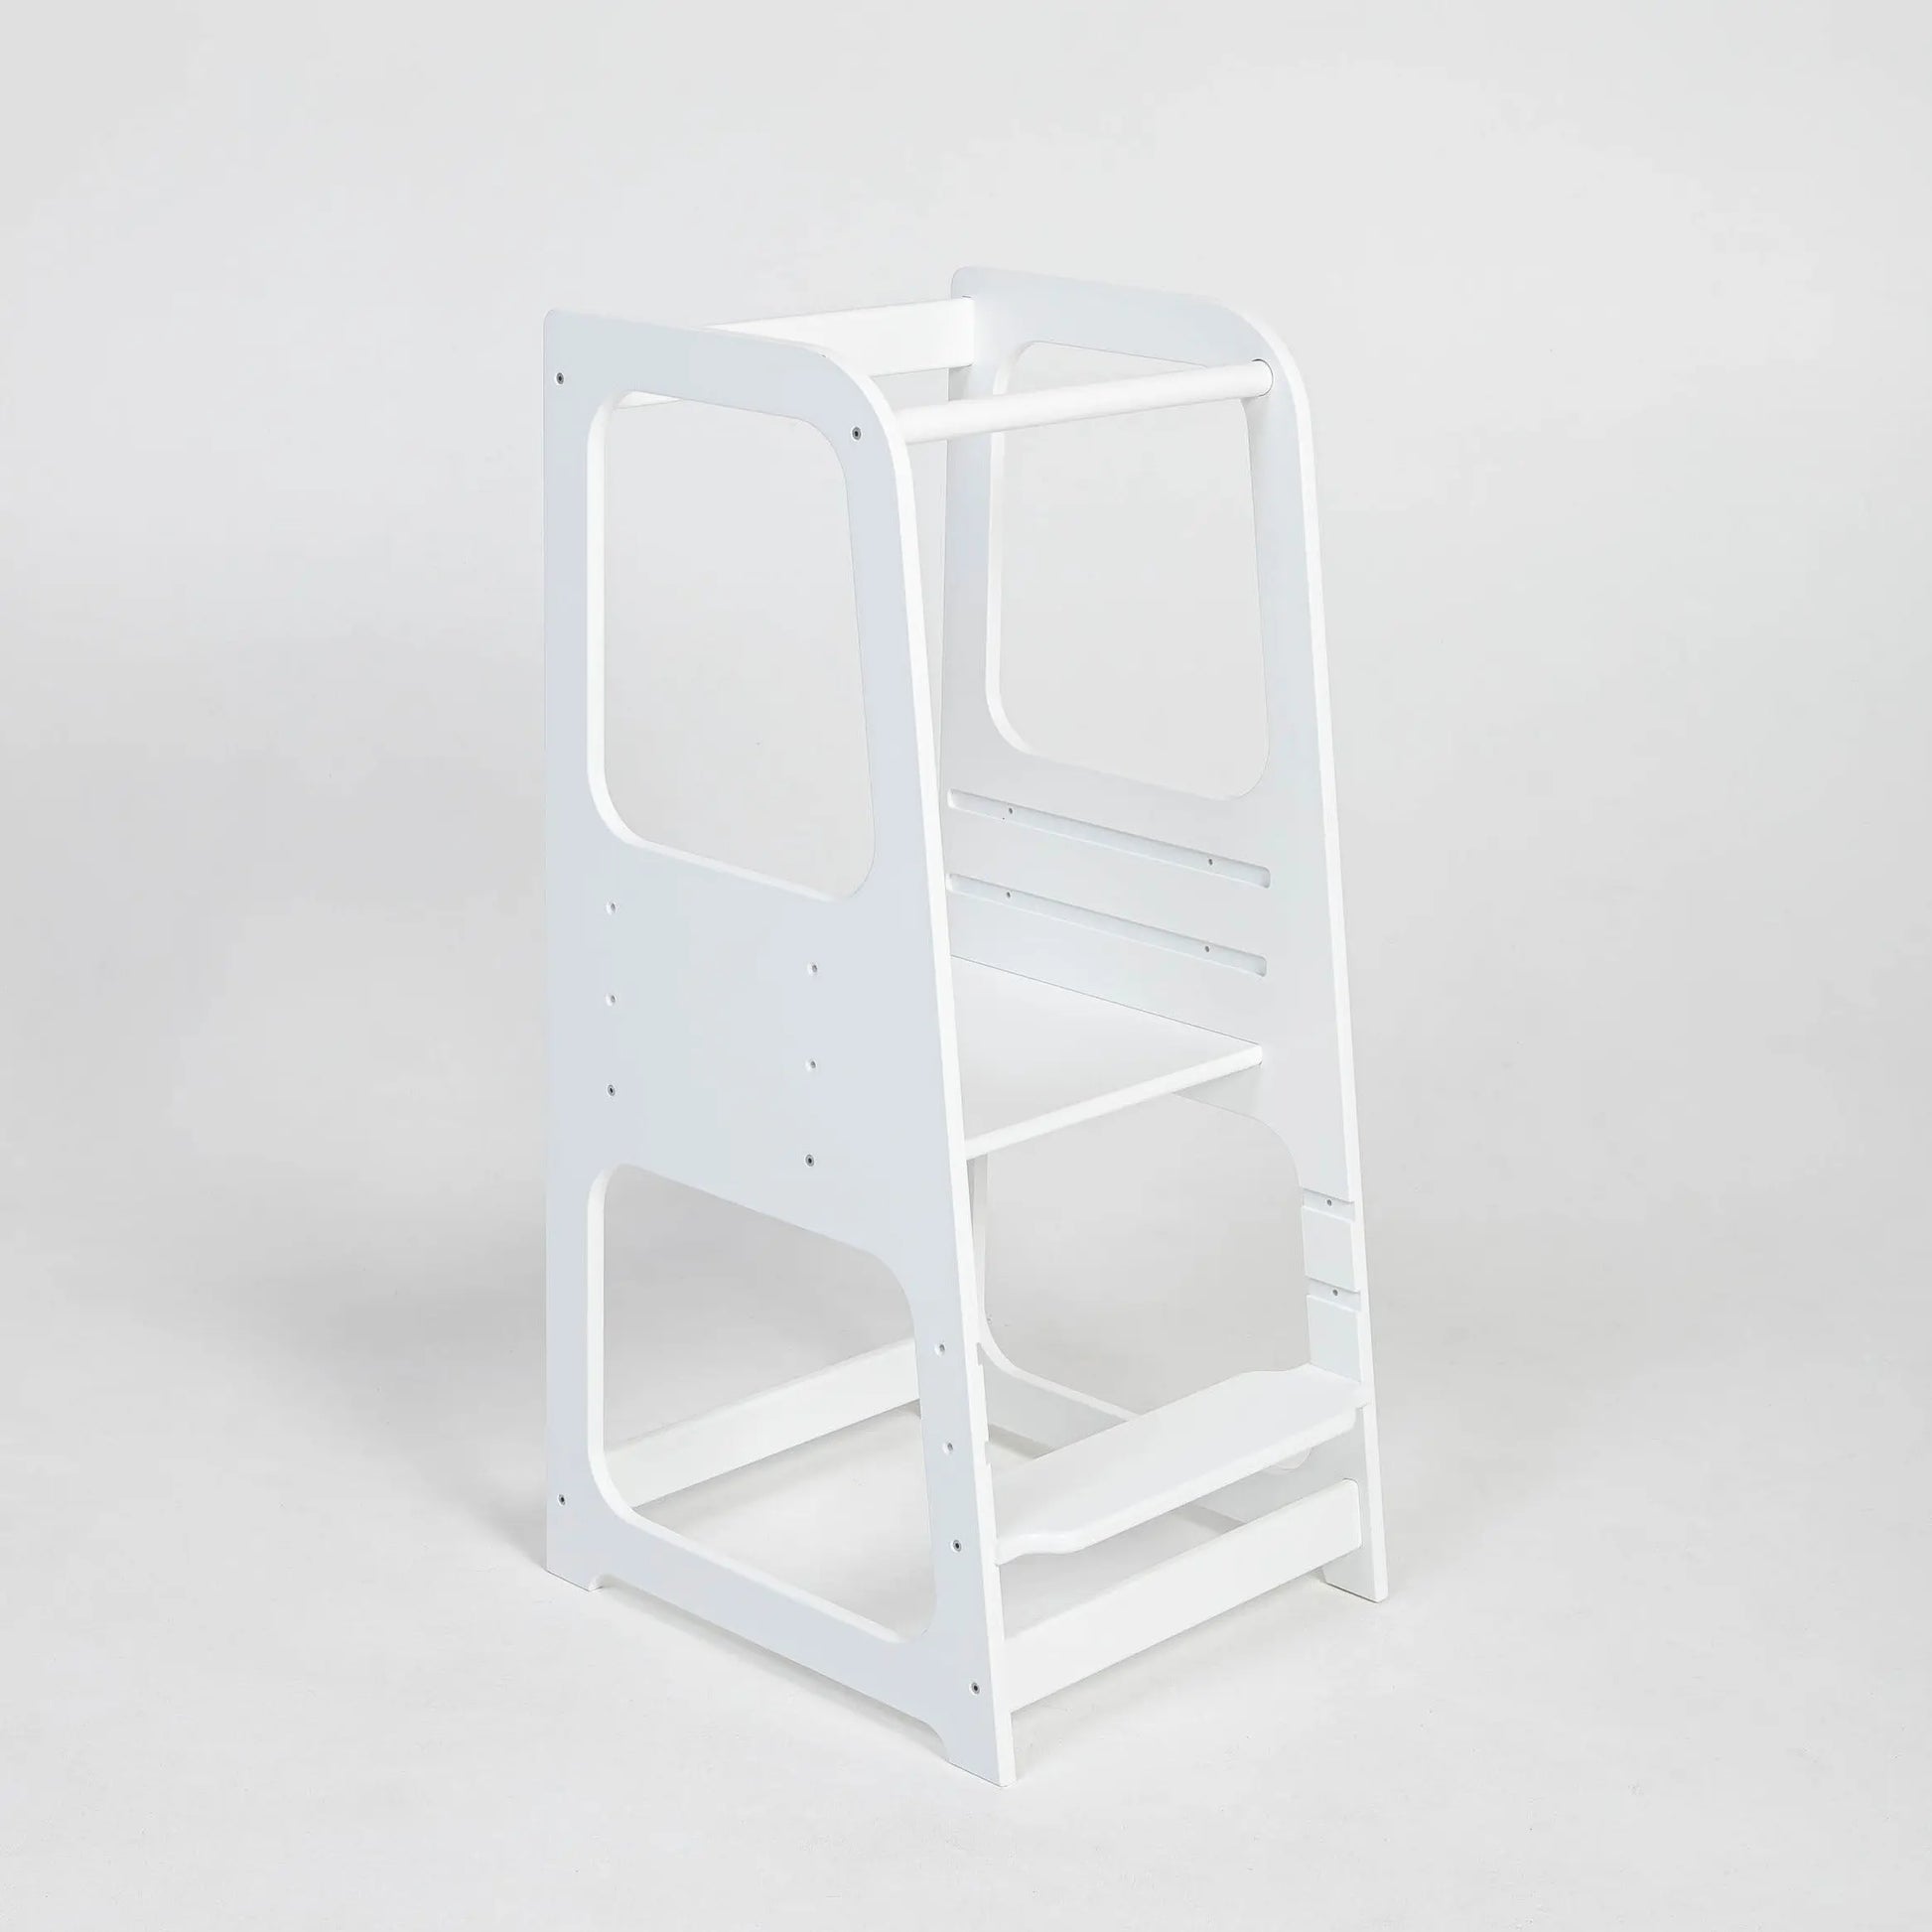 A Montessori Learning Tower Step Stool for Kids, featuring a white ladder with shelves and a chair, designed for safe and independent kitchen exploration by young learners.